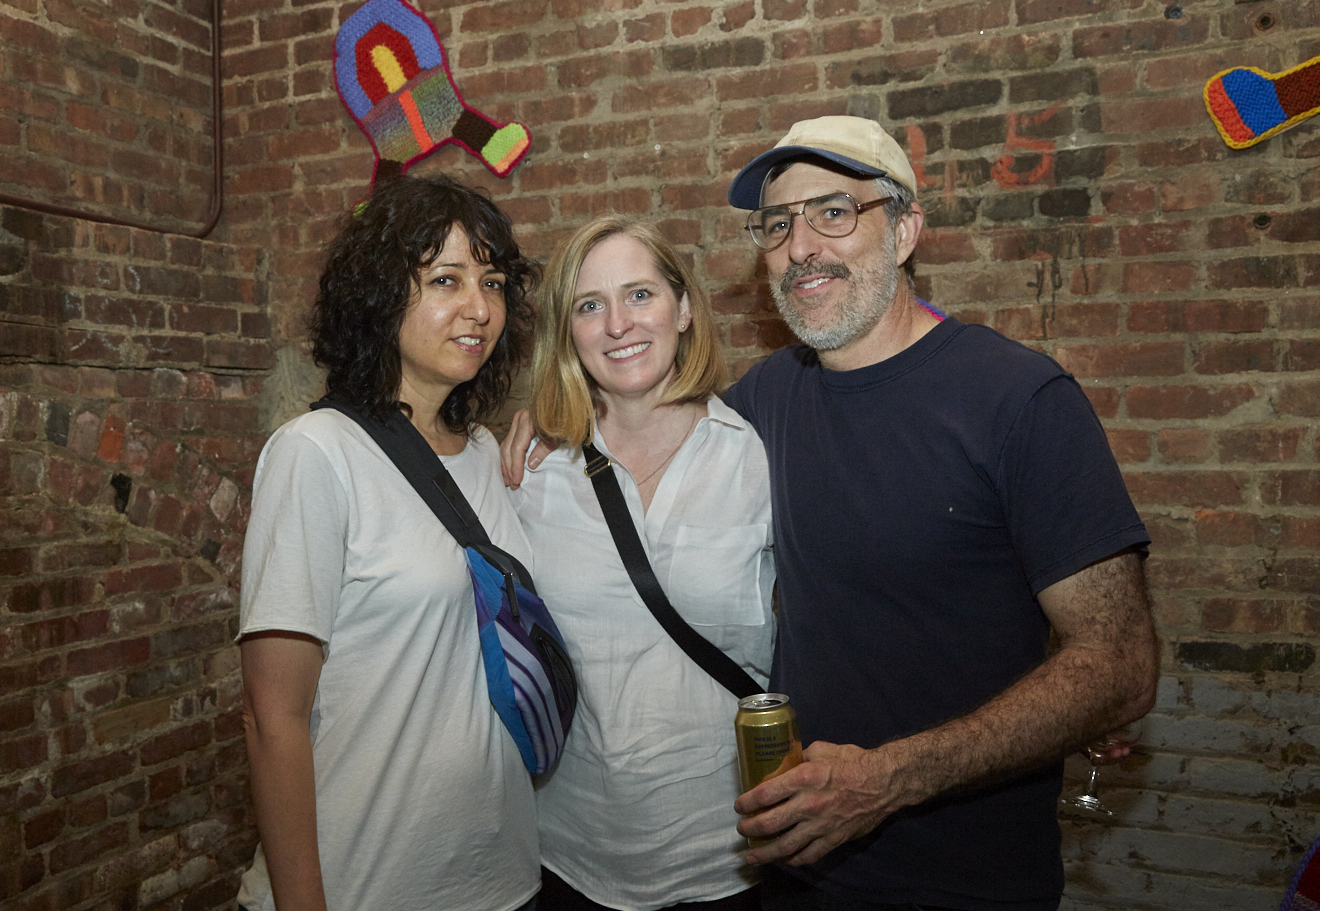 Copy of Caroline Wells Chandler Opening Reception for Queer|Art|Pride at Wythe Hotel, June 2017. (Photo by Eric McMatt)